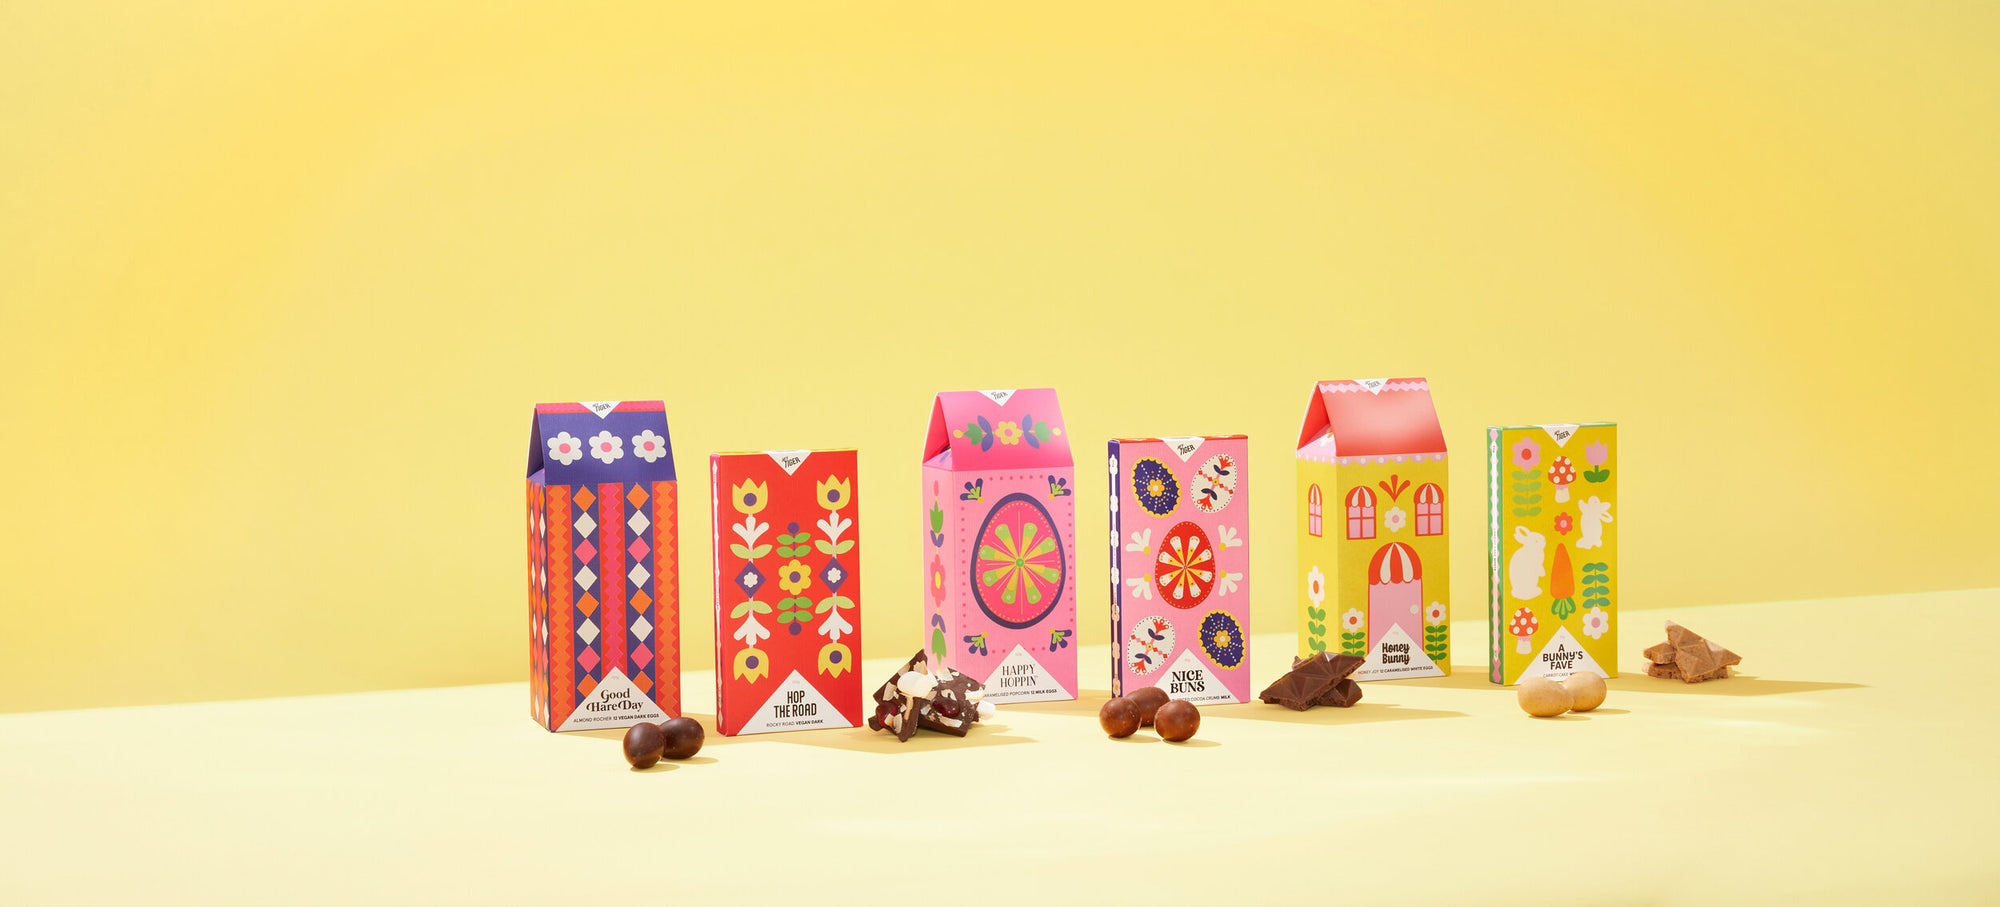 Colourful packaging design for a collection of chocolate bars, photographed against a yellow background and featuring folk art-inspired papercraft collage illustration in various Easter-themed motifs.